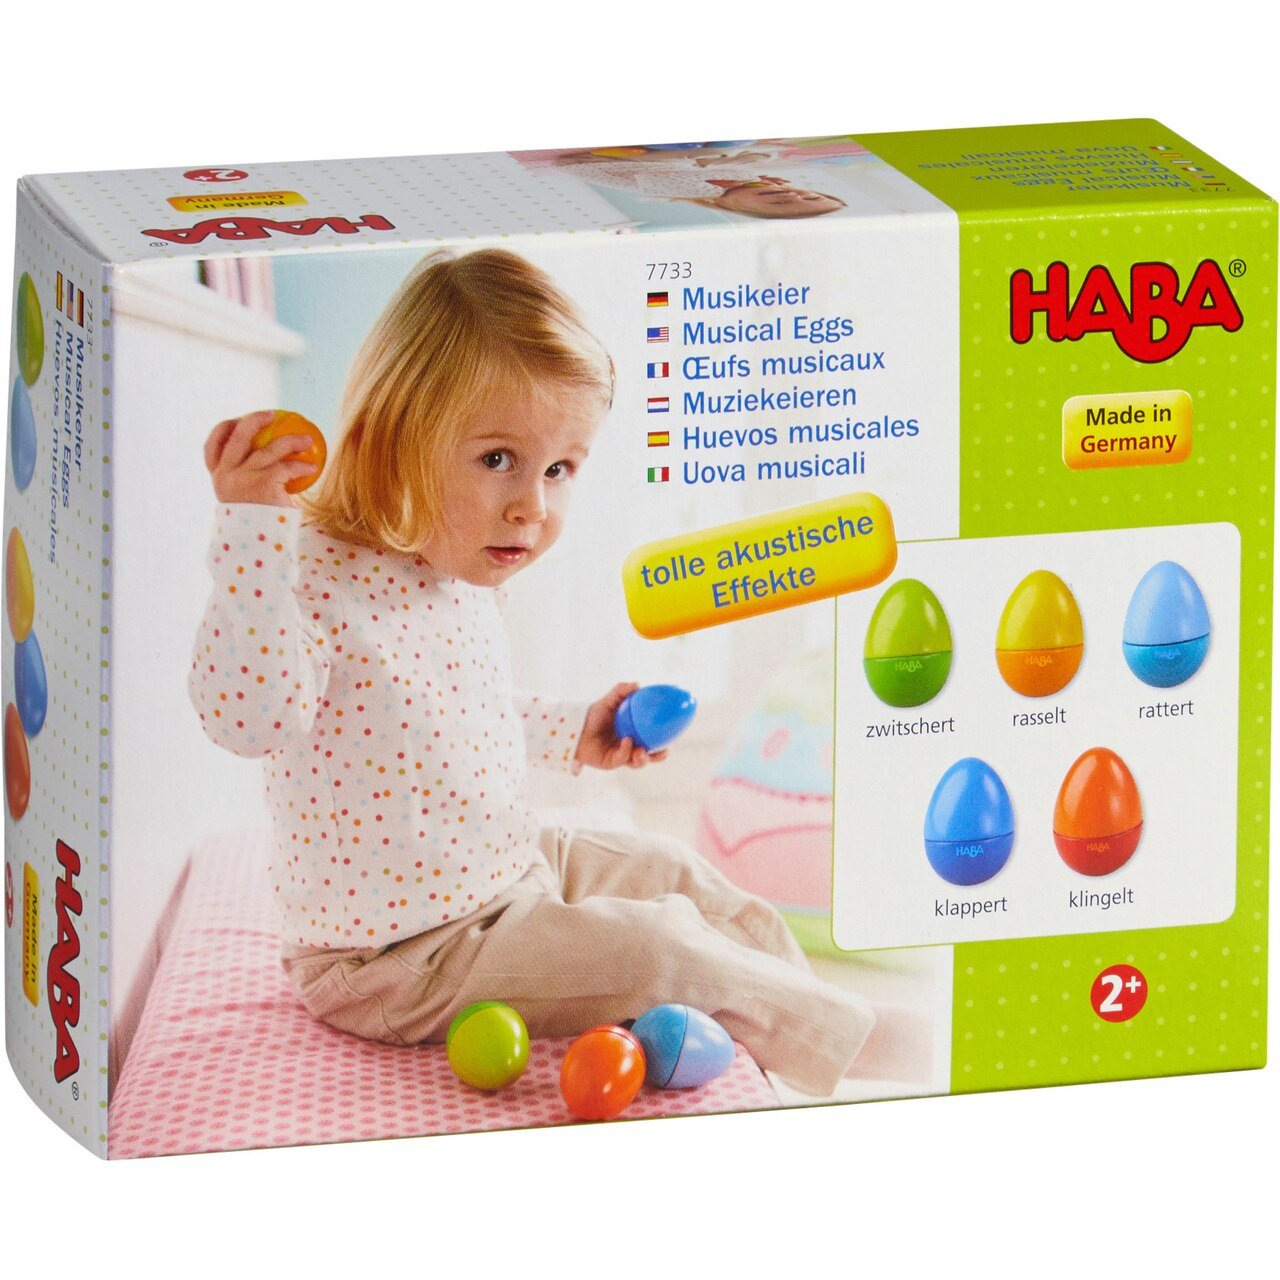 HABA Musical Eggs - Wood Wood Toys Canada's Favourite Montessori Toy Store